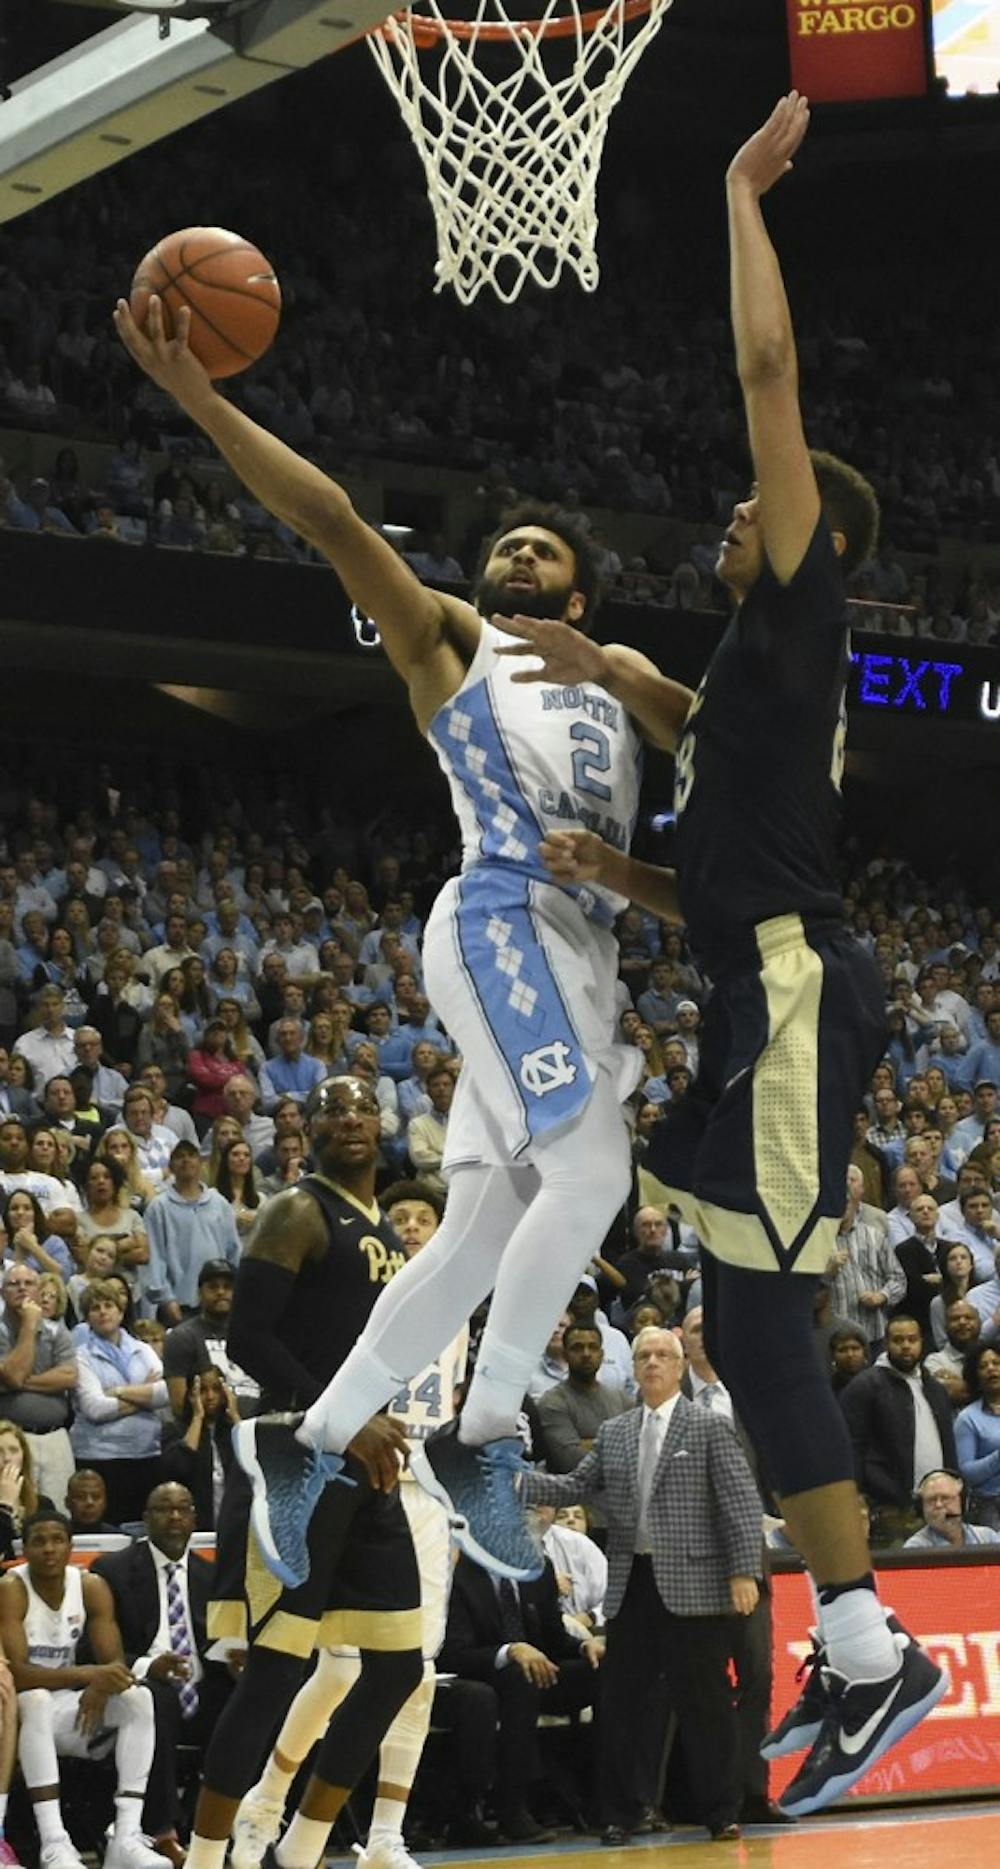 UNC guard Joel Berry (2) goes up for a contested layup in the final moments against Pittsburgh on Tuesday night.